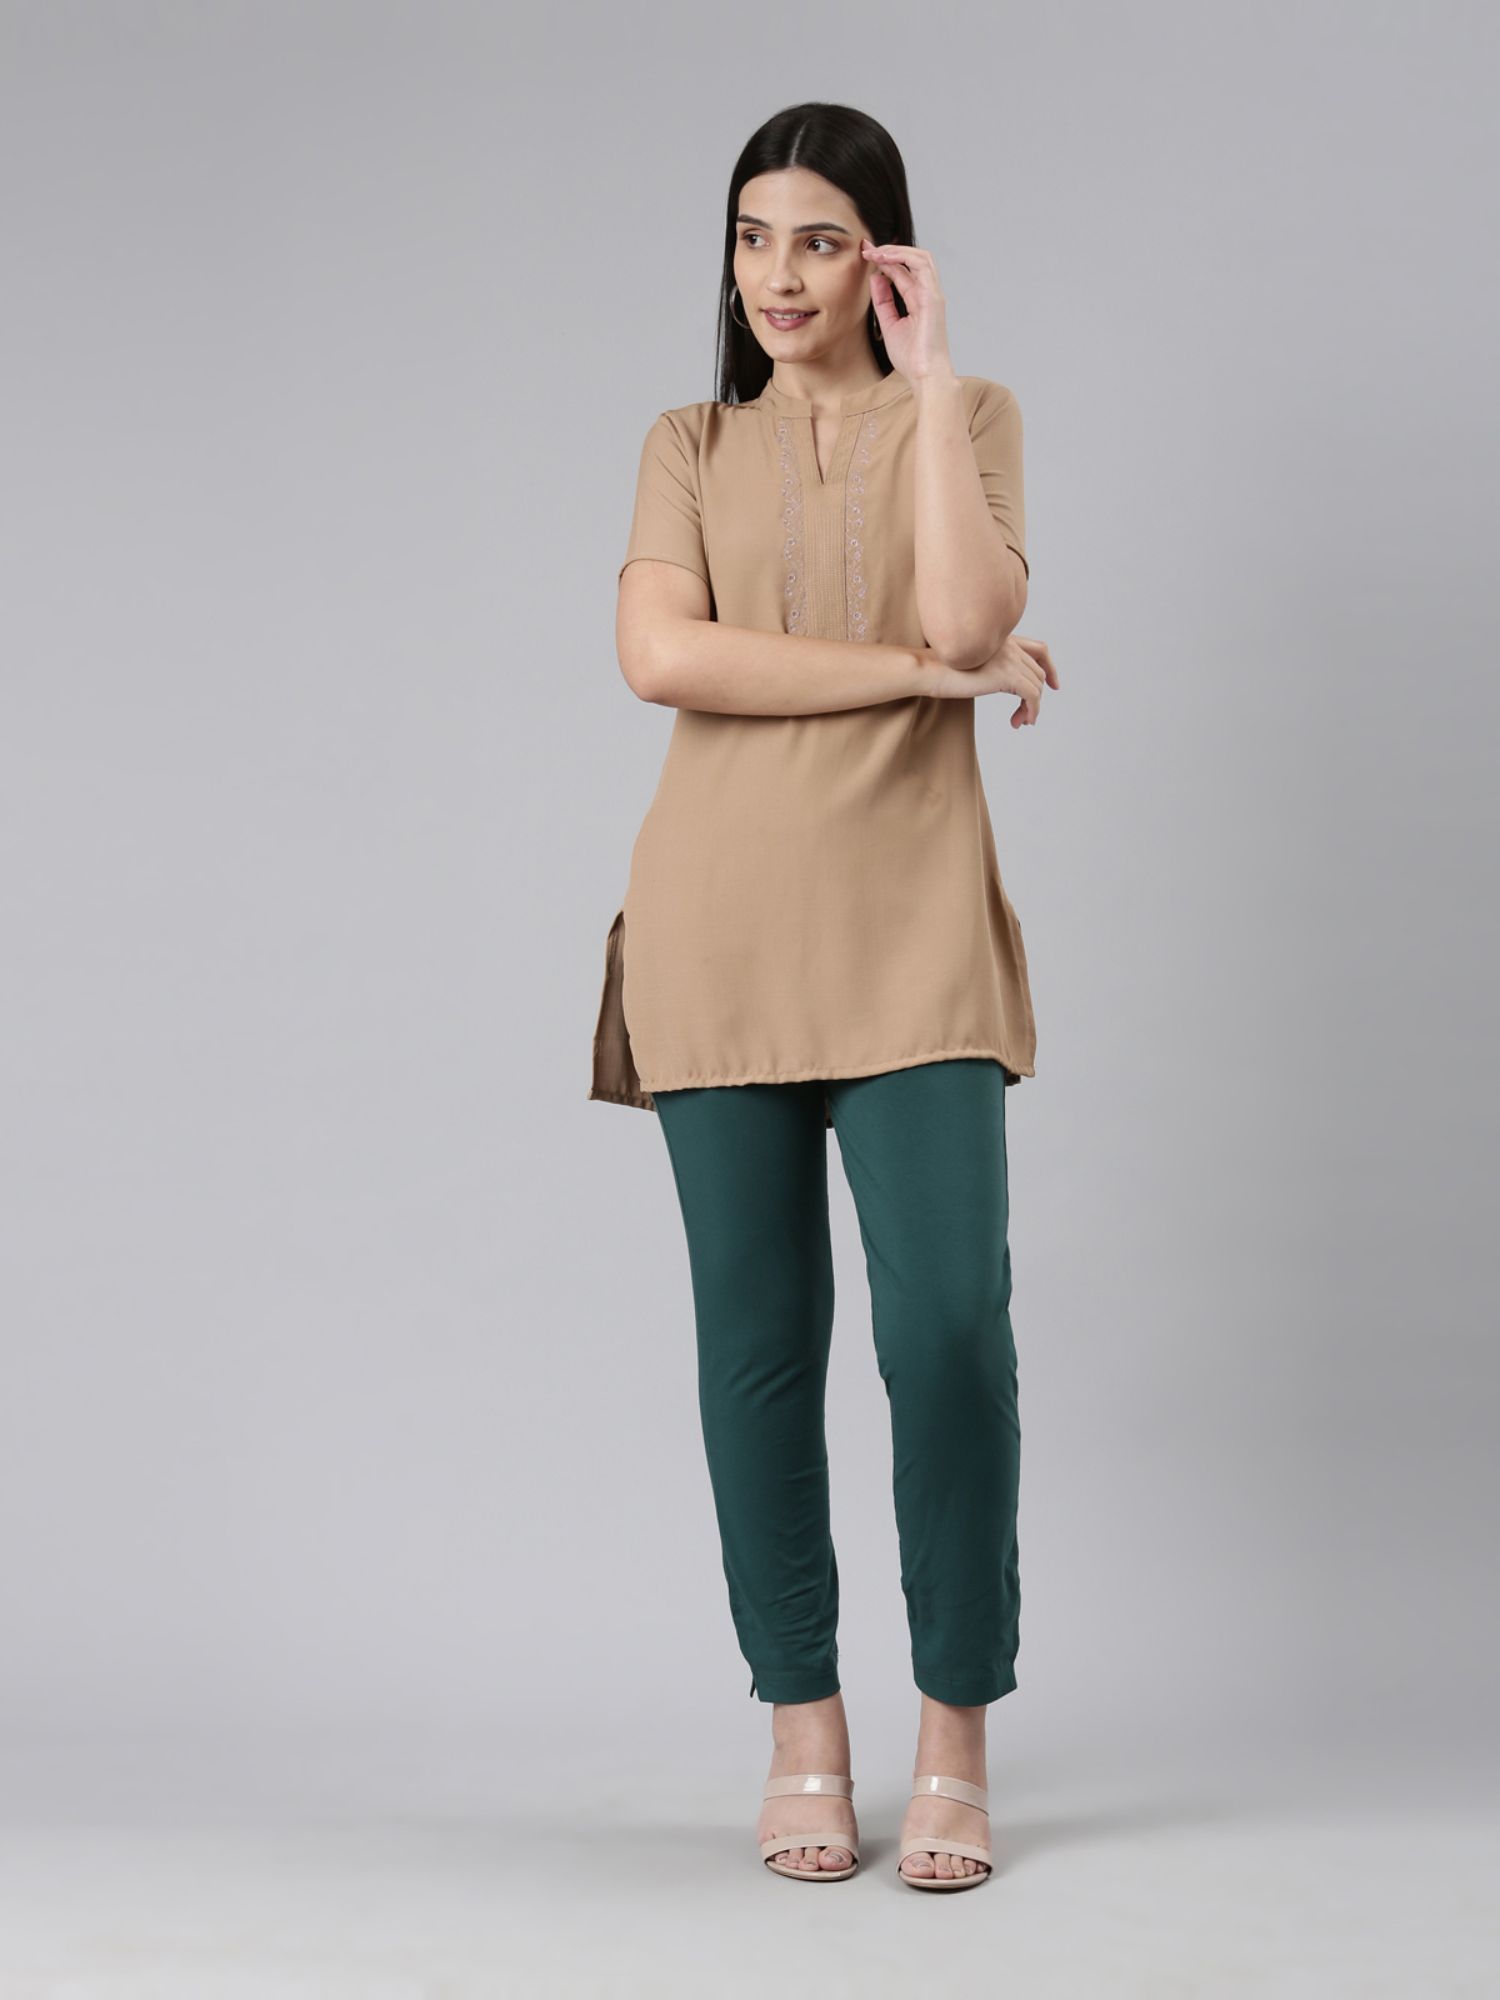 Find Formal Casual Wear Bottoms for women online | Go Colors